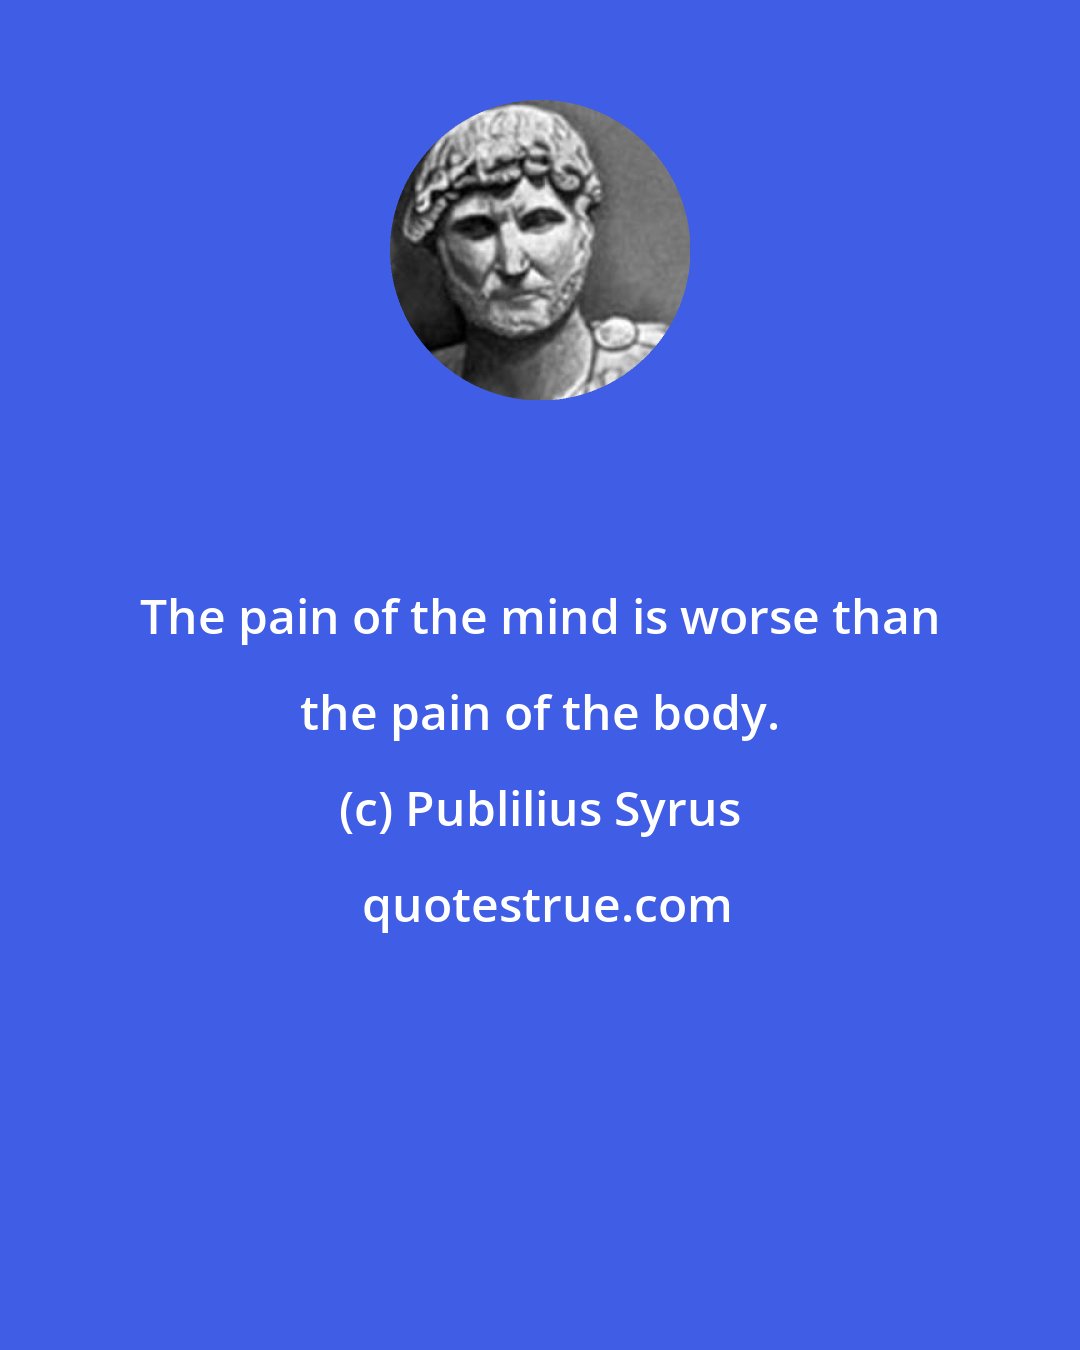 Publilius Syrus: The pain of the mind is worse than the pain of the body.